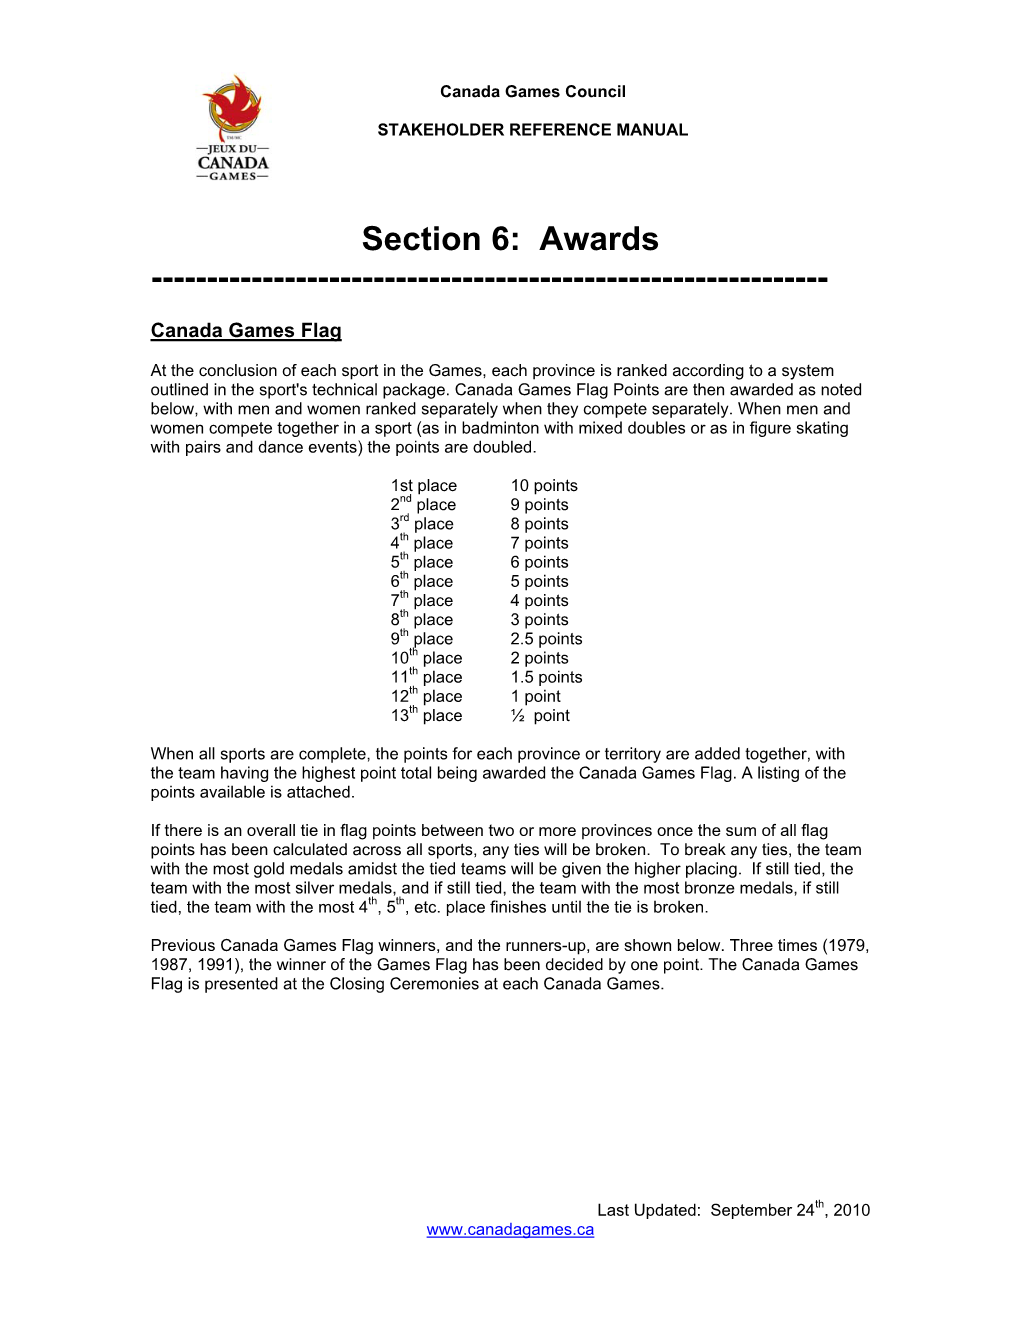 Section 6: Awards